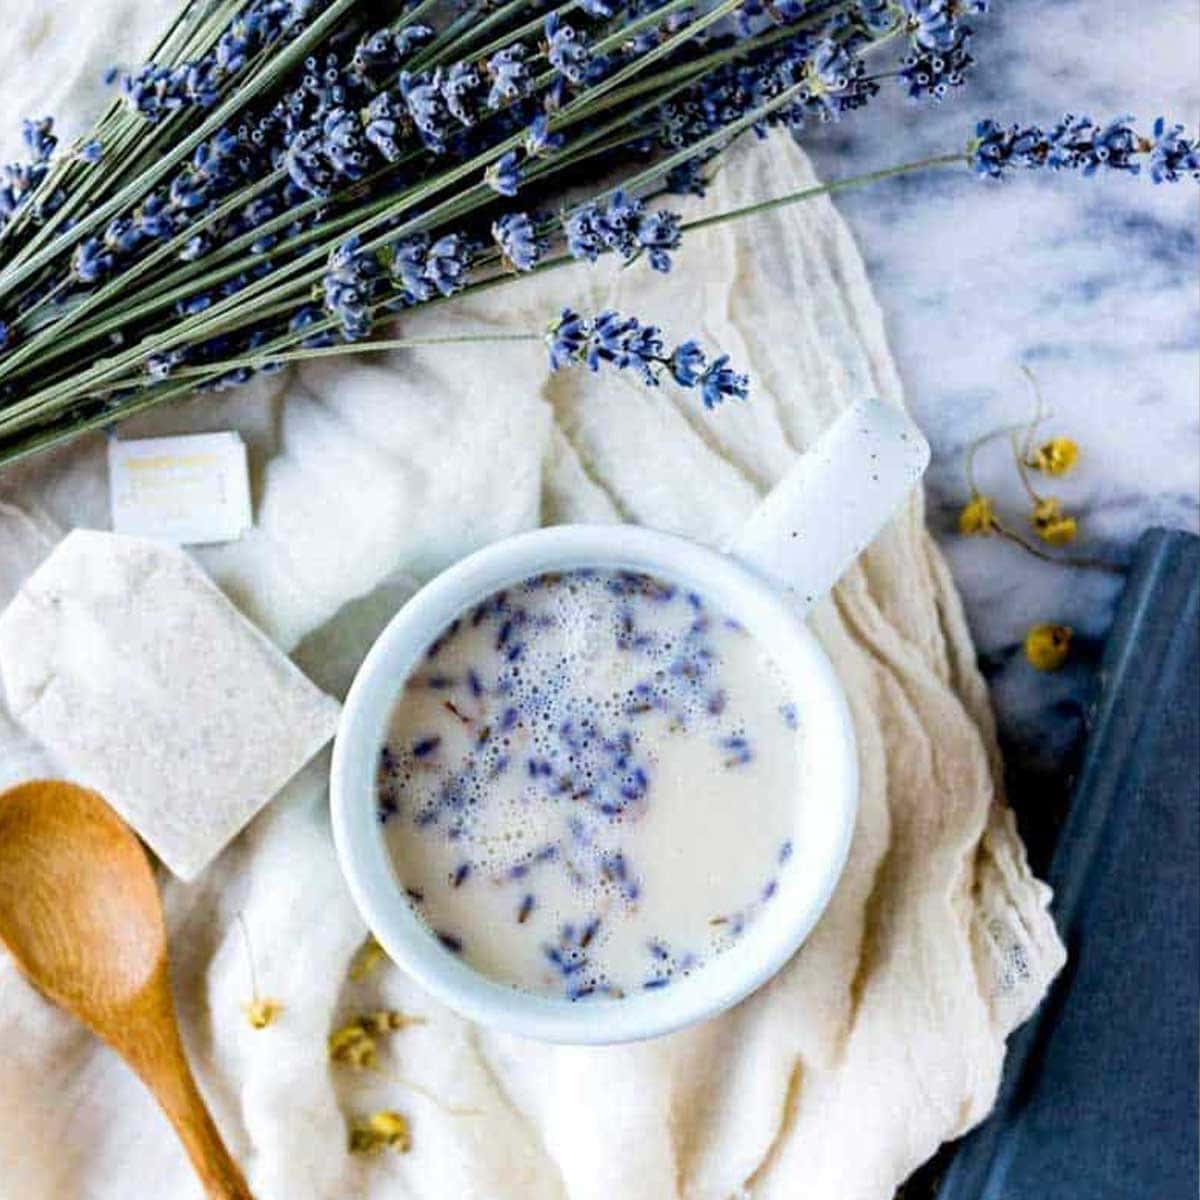 lavender tea in a white mug surrounded by lavender buds.